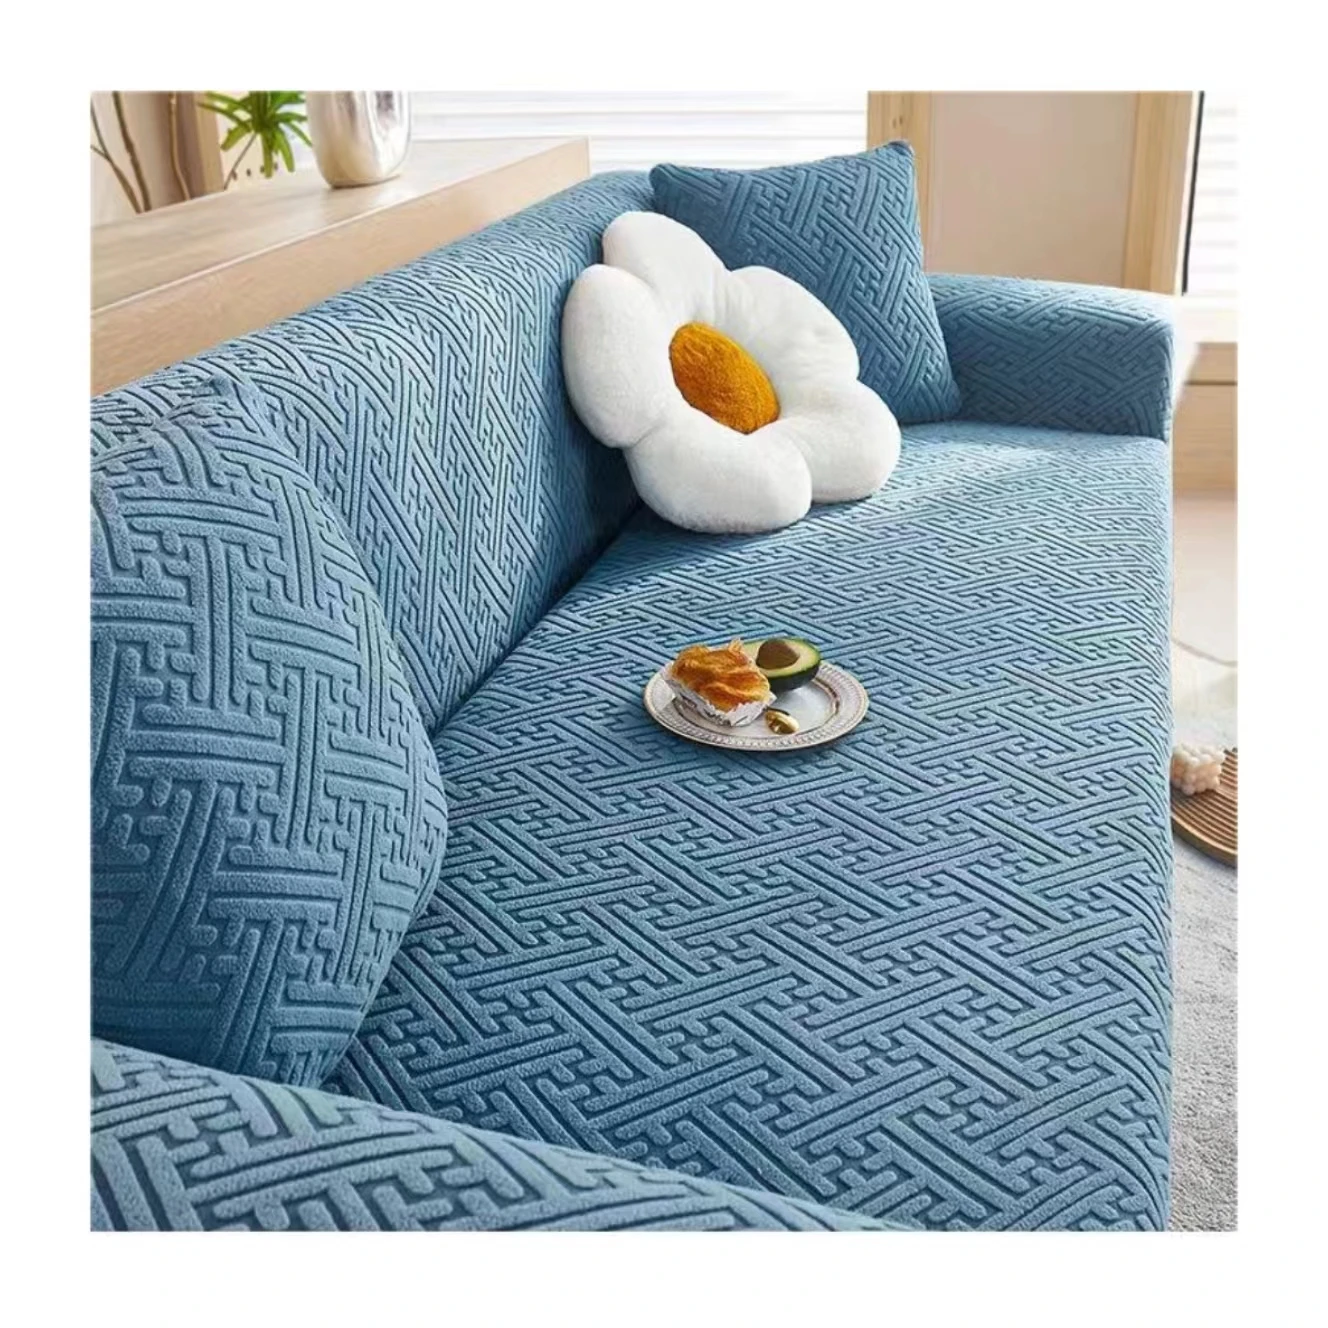 Wholesale Knitted Brushed Sofa Cover Elastic Multi New Designs Universal Covers For Sofa removable cover